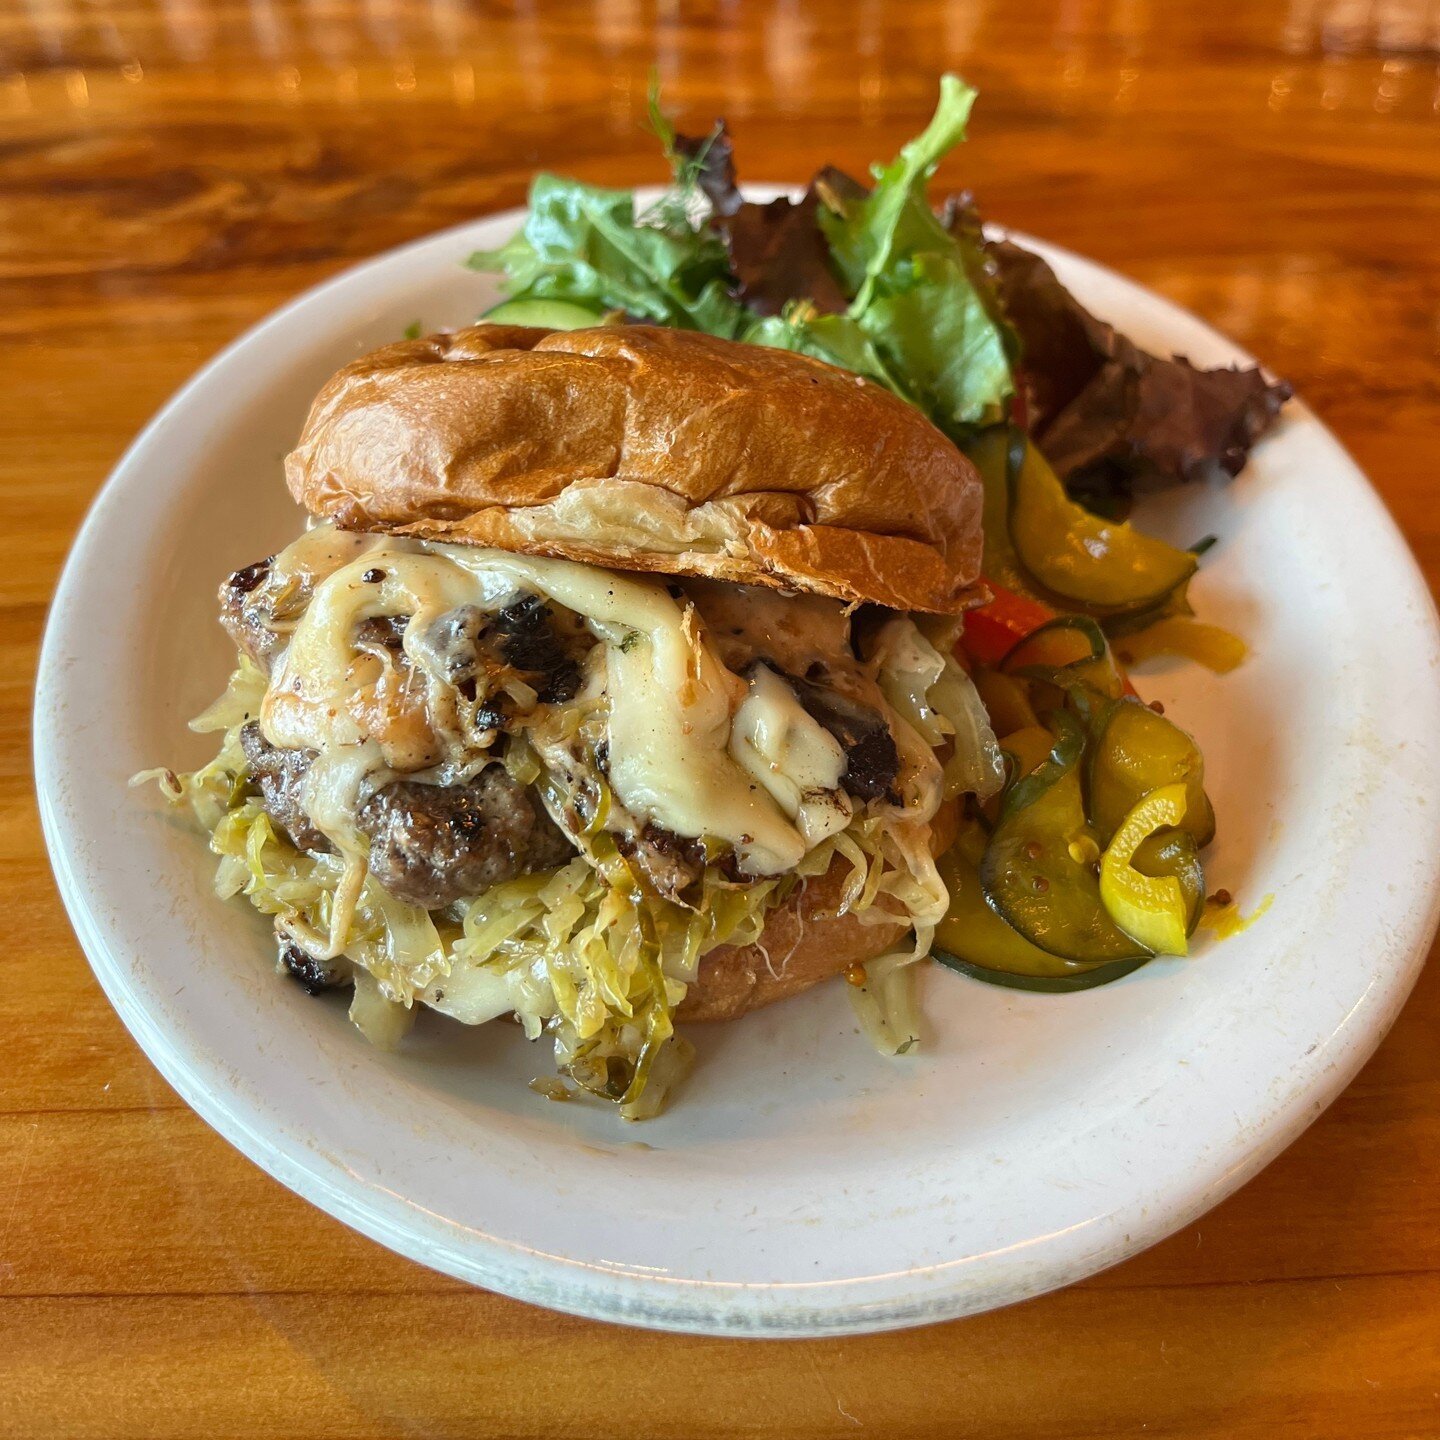 ***New Burger of the Month***⁠
⁠
Pastrami Reuben Burger⁠
⁠
Grass Fed TMK Beef, House Smoked Pastrami, Lost Sauce, House Made Sauerkraut and Emmentaler Cheese on Dos Hermanos Brioche. Served with House Fries.⁠
⁠
#waywardsandwiches #toomuchflavor⁠